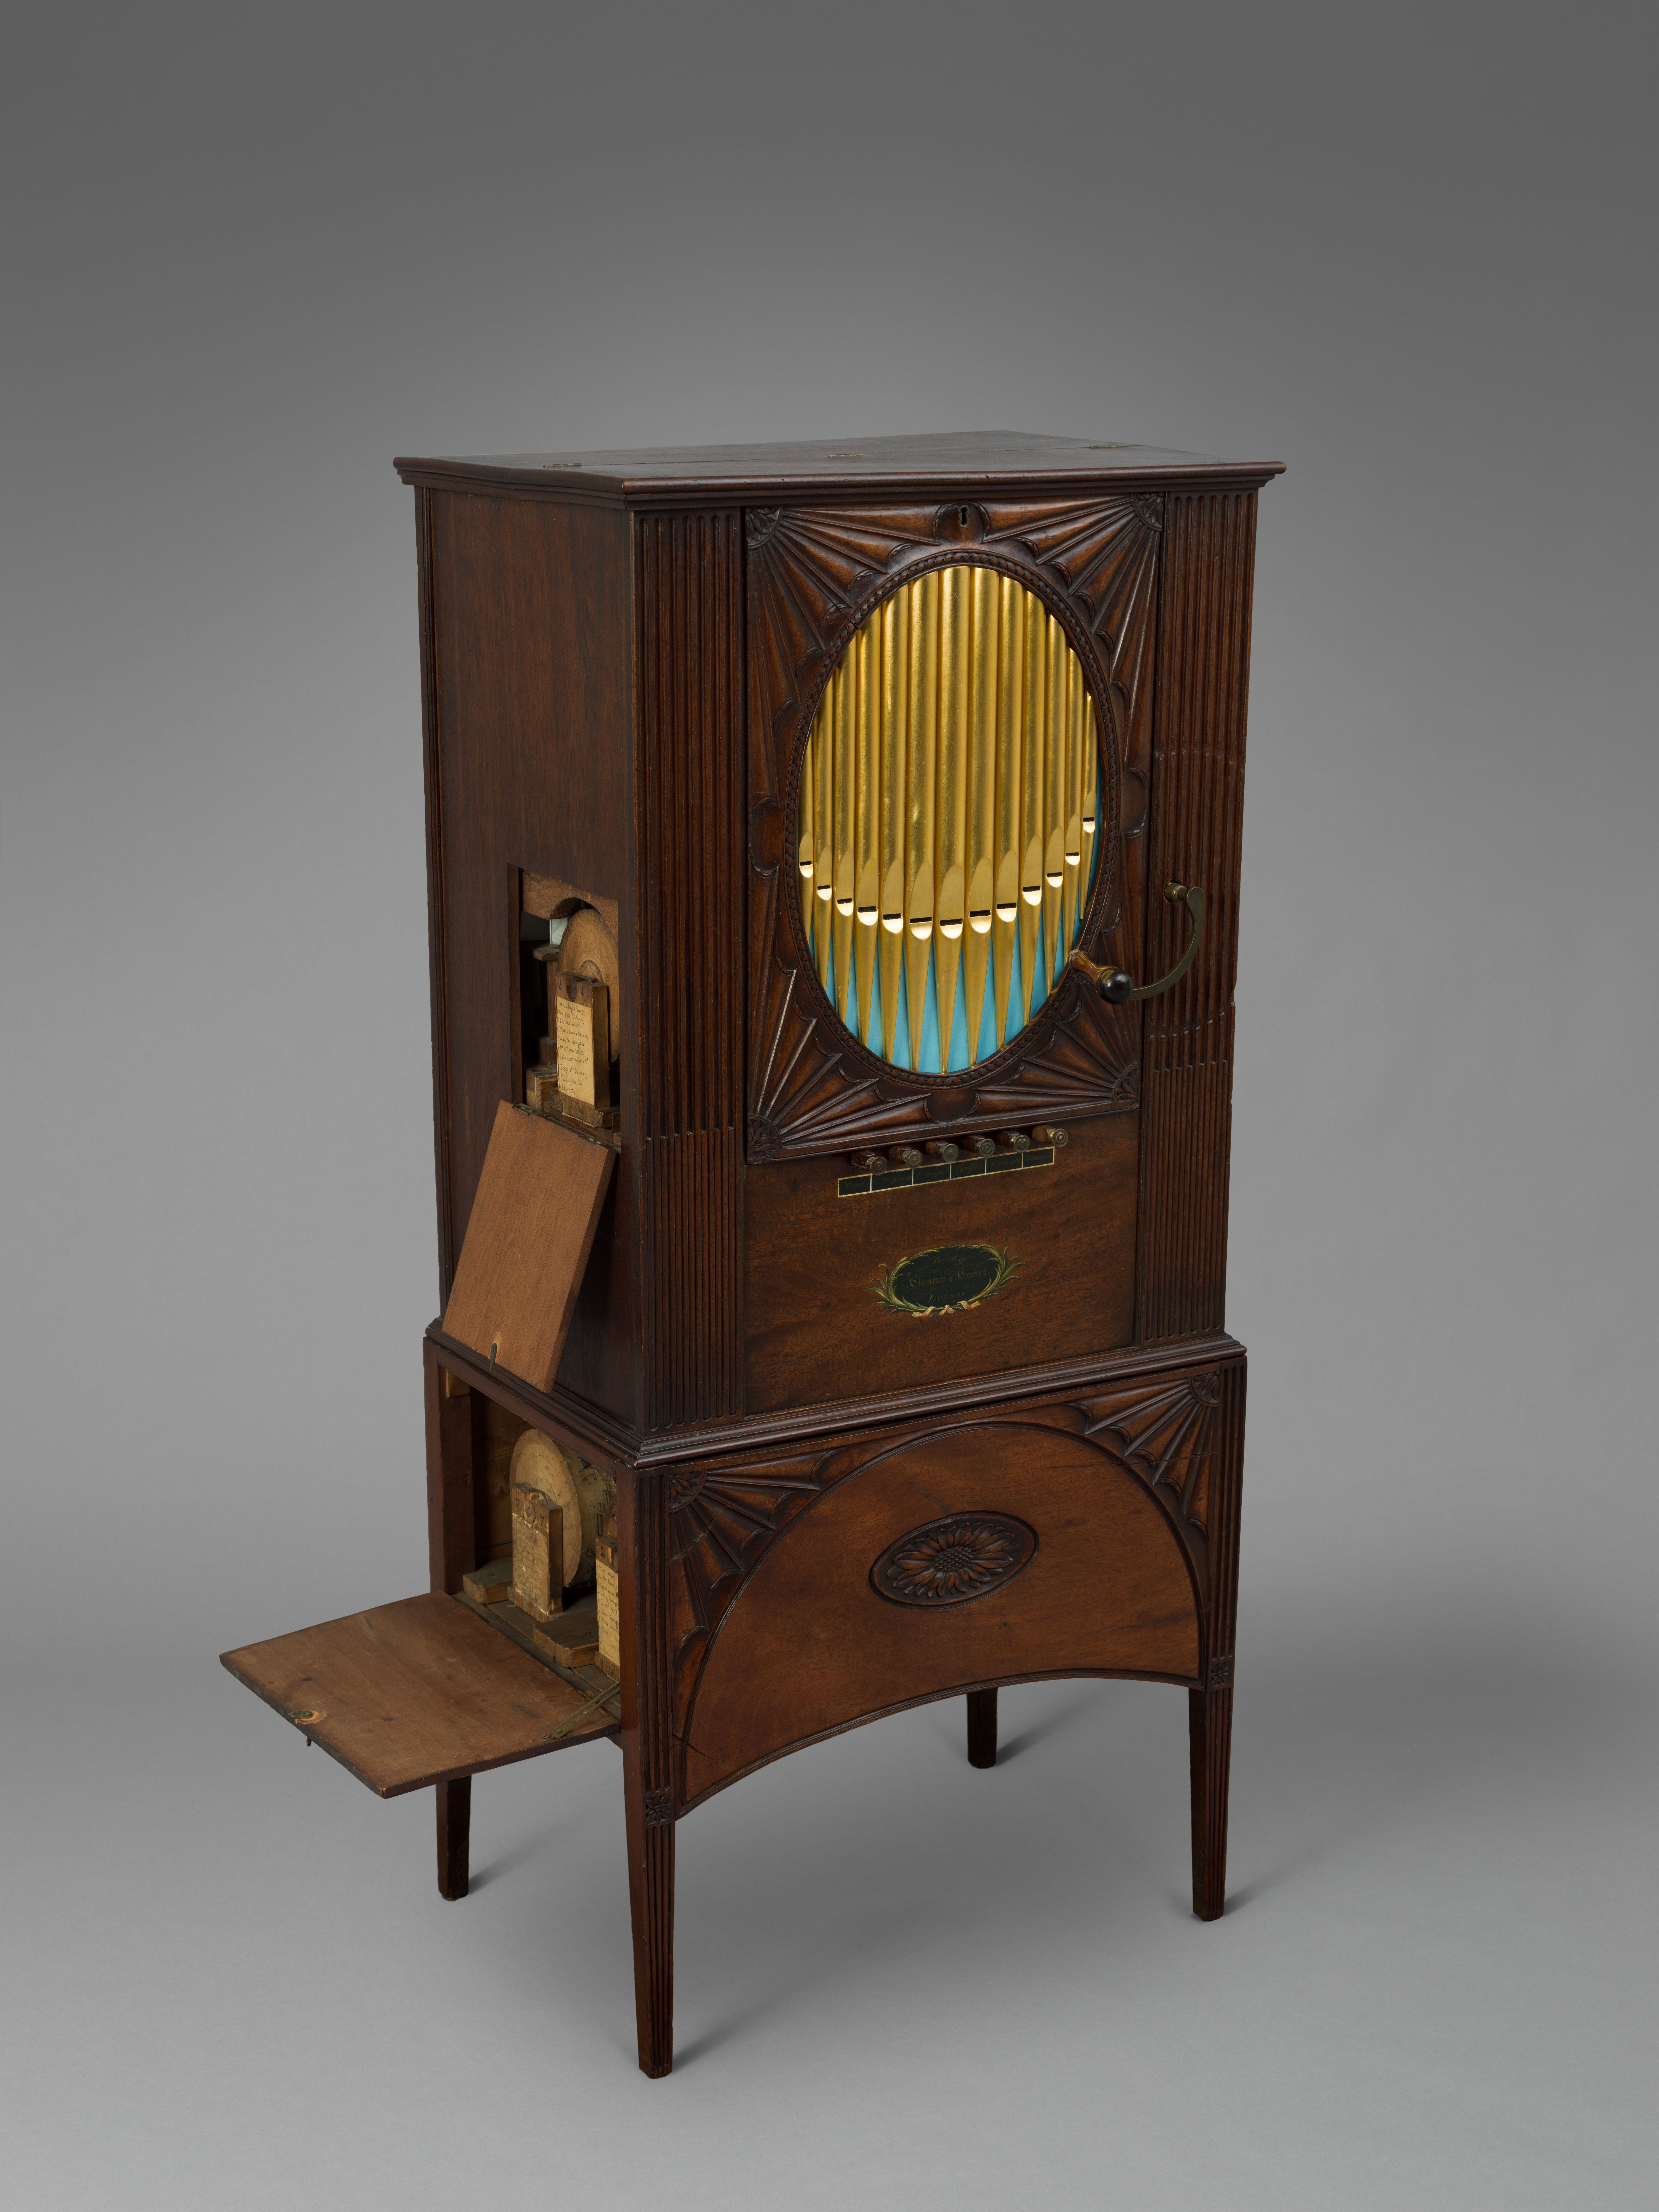 Barrel organ, Clementi & Co., London, England, 1805-1820. Mahogany, oak and deal framework and interior supports, iron and brass hardware, wood barrel with brass pins. Gift of Mr. and Mrs. Harry V. Long, 1933-487 